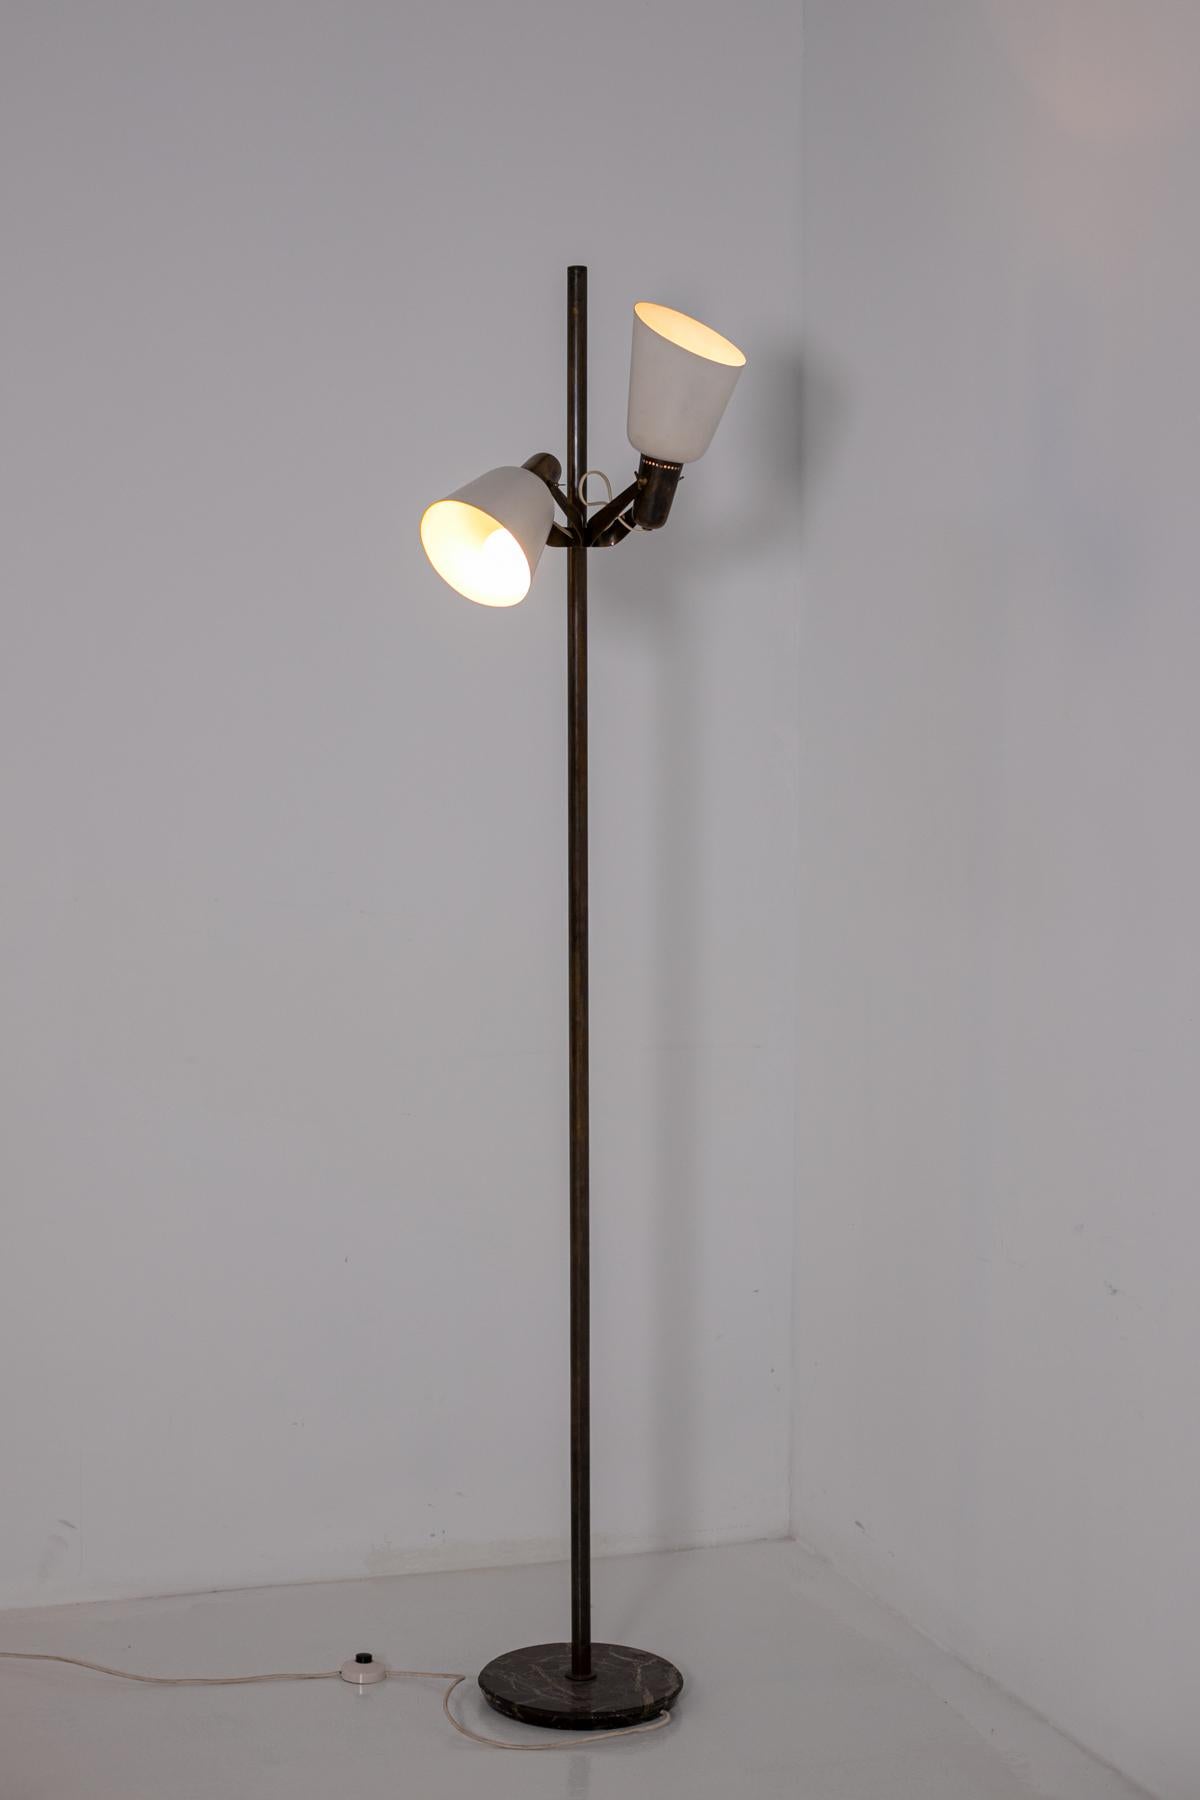 Rare floor lamp by Gino Sarfatti for the ArteLuce manufactory from the 1950s.
Made with marble base and brass floor lamp and two white painted aluminum lamp holders. The brass structure enjoys a beautiful patina. The lamp holders are adjustable